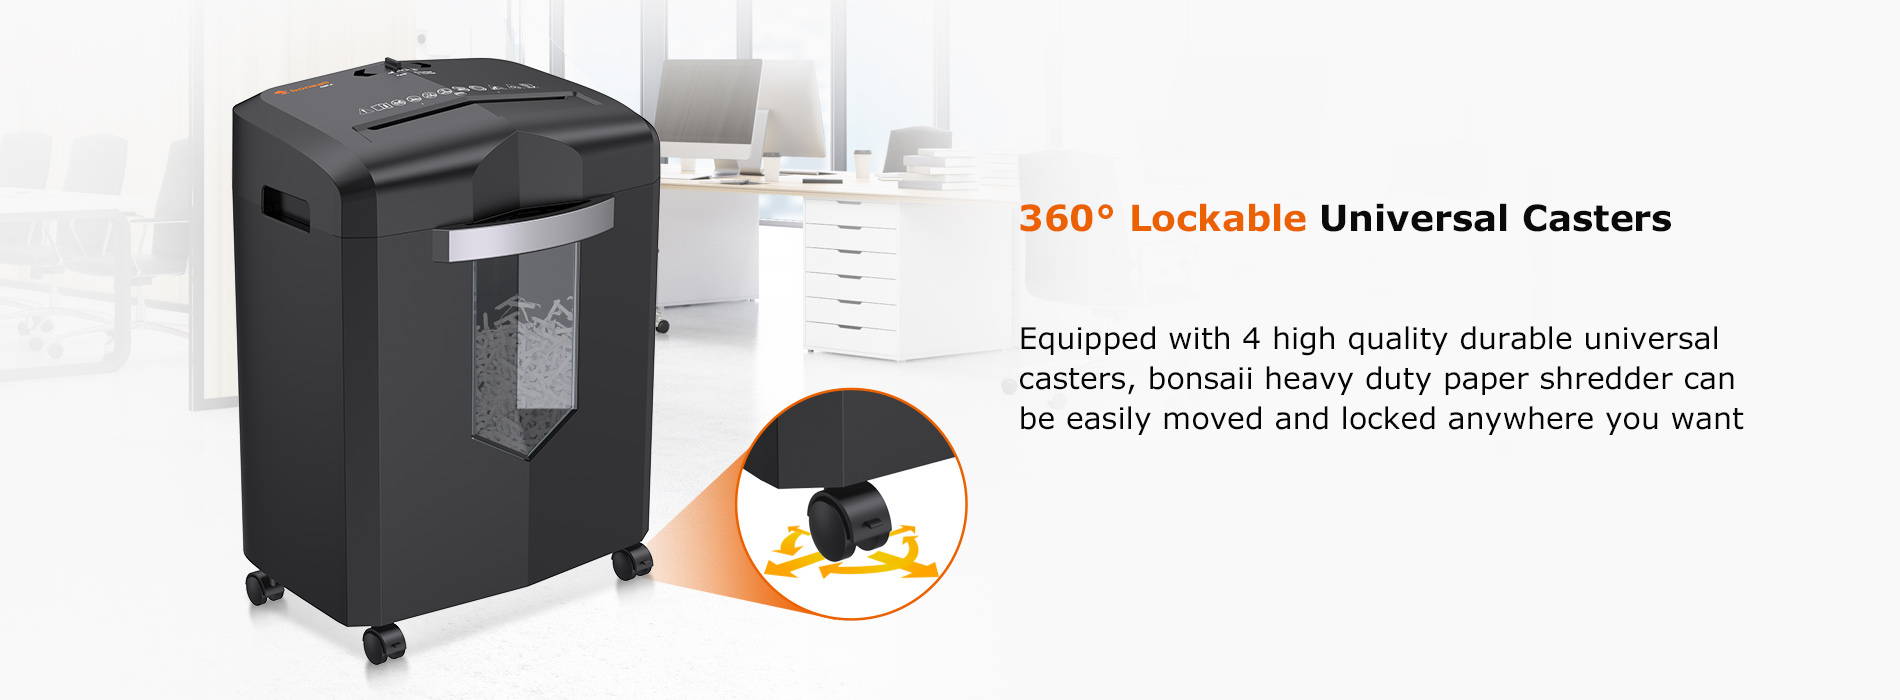 360° Lockable Universal Casters  Equipped with 4 high quality durable universal casters, bonsaii heavy duty paper shredder can be easily moved and locked anywhere you want 